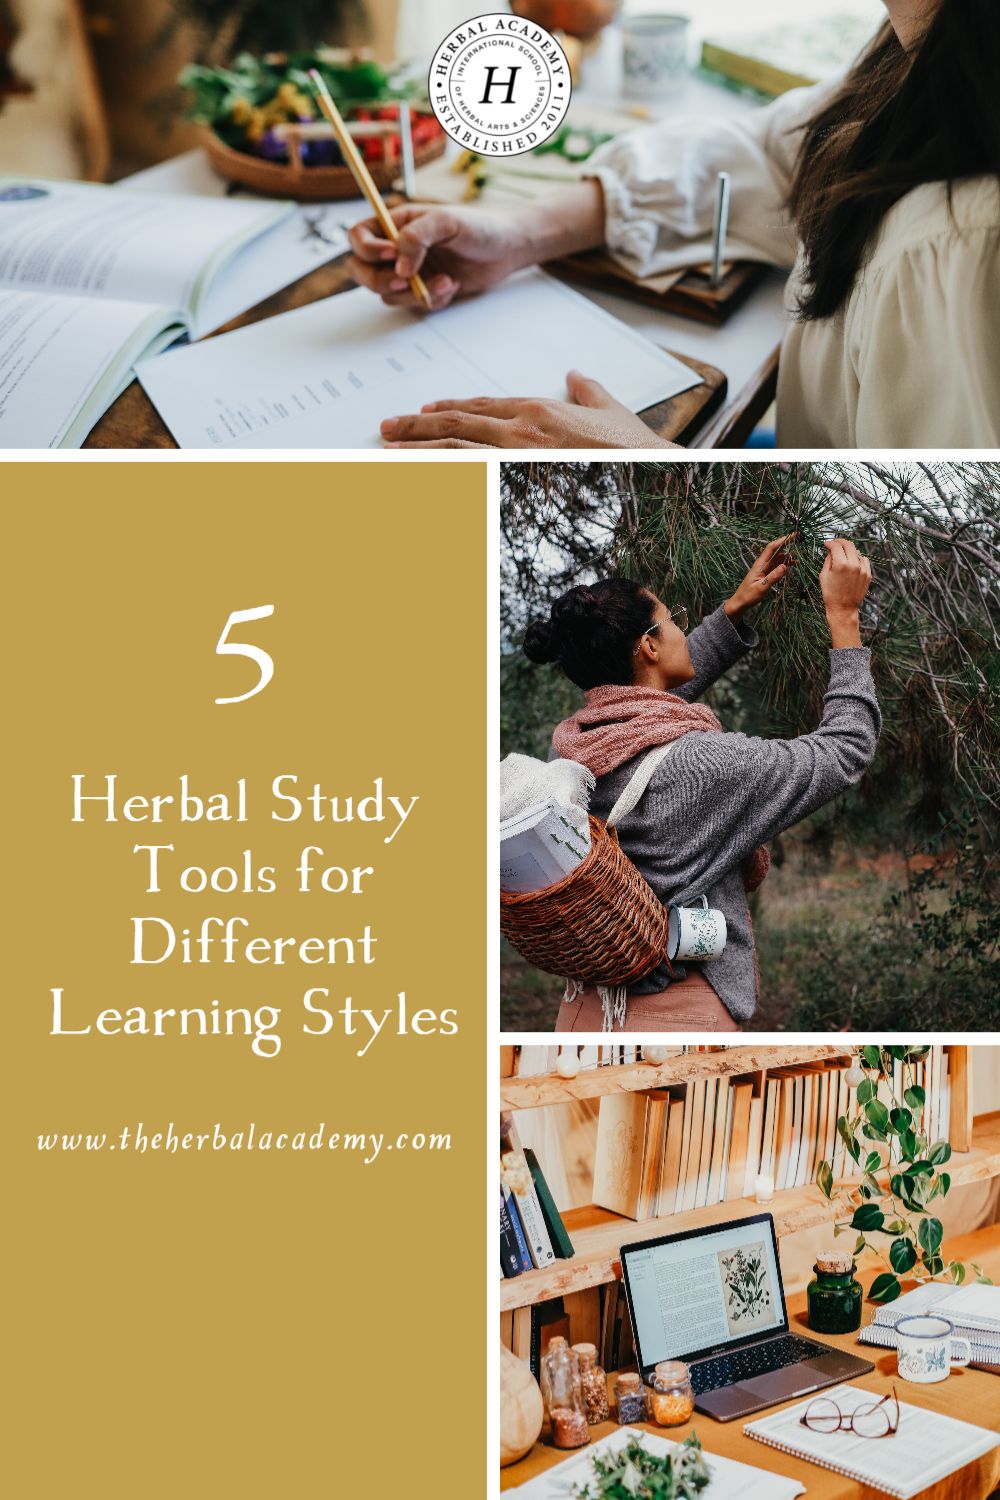 5 Herbal Study Tools for Different Learning Styles | Herbal Academy | This sneak peek into the new My Herbal Study Tips Mini Course dives into the topic of herbal study tools for different learning styles.